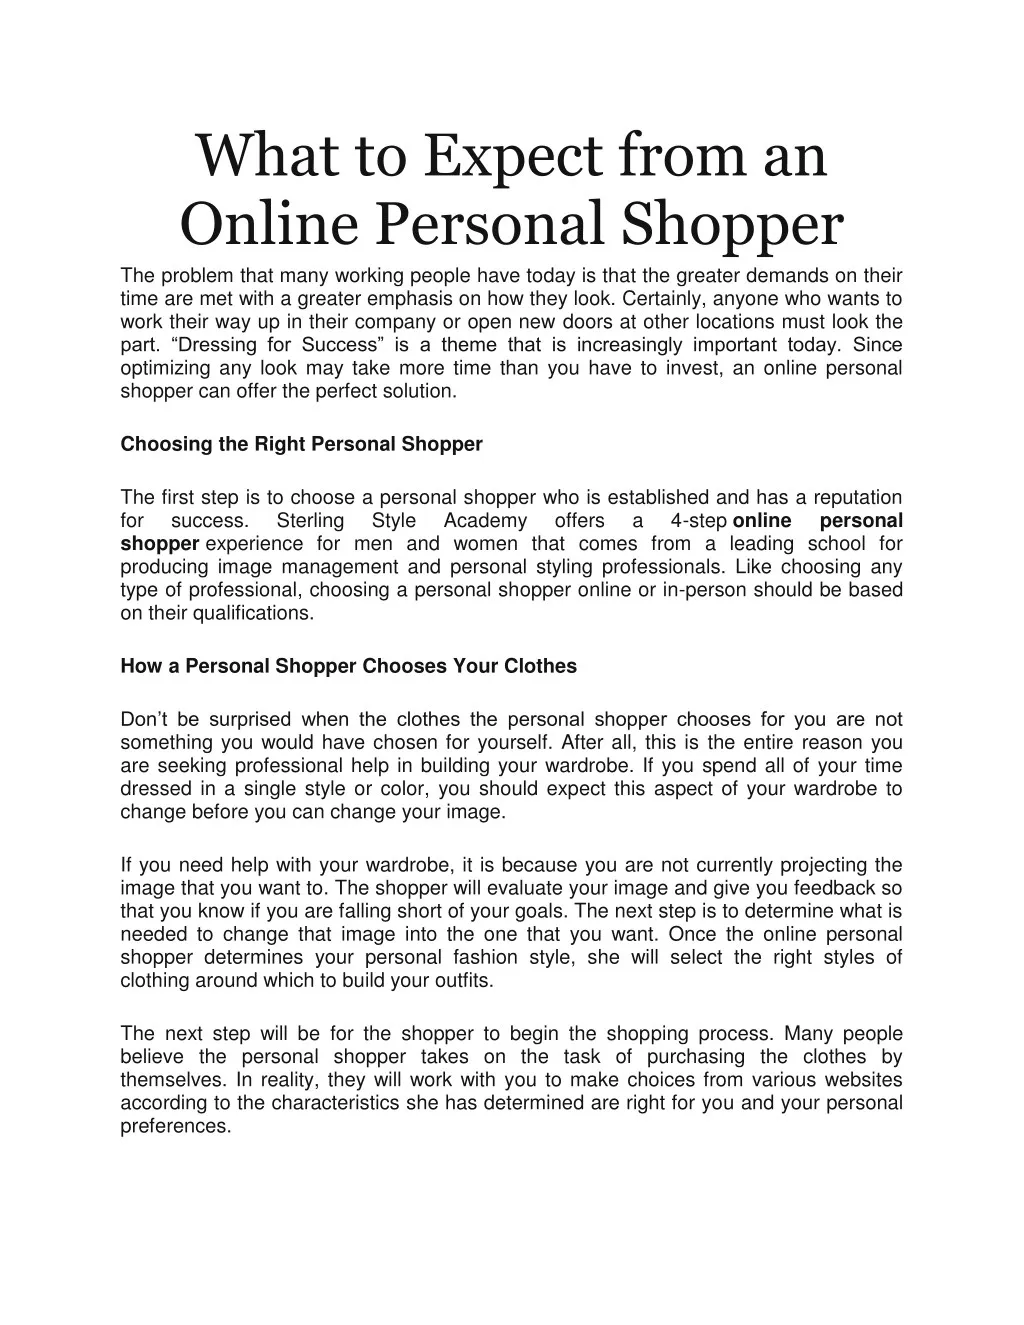 what to expect from an online personal shopper